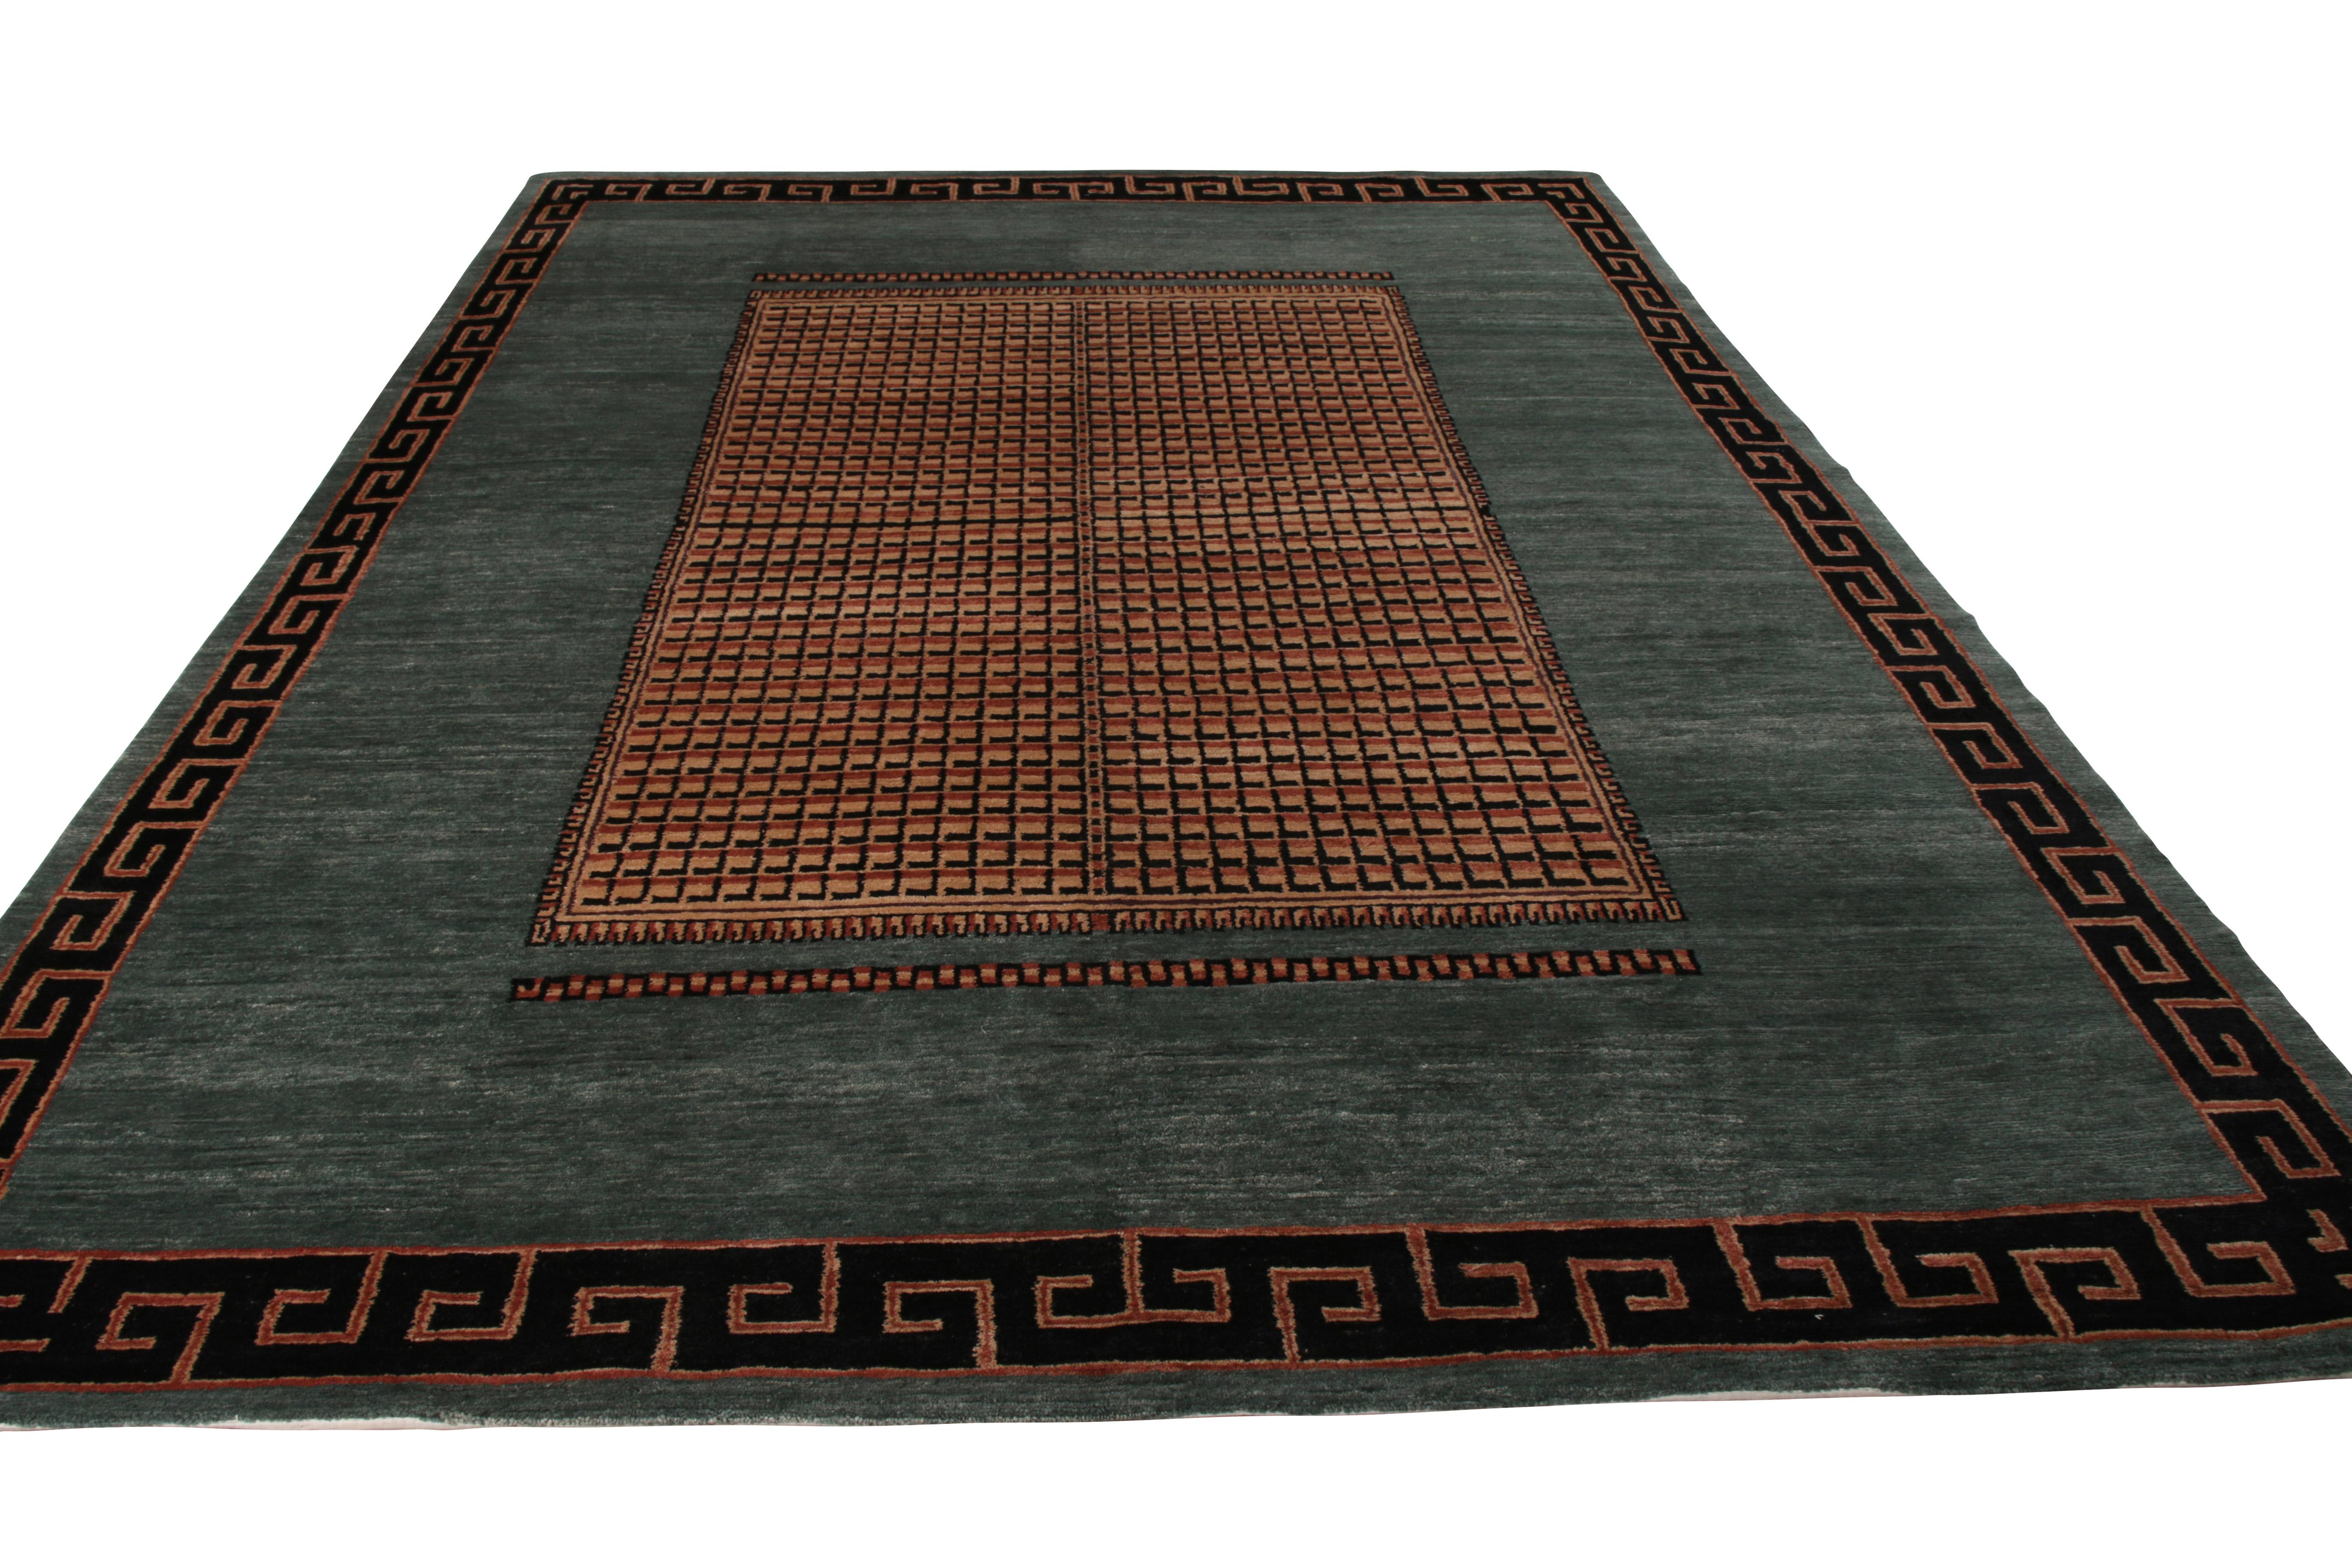 Hand knotted in wool pile, this 9 x 12 transitional rug is an addition to the European rug collection by Rug & Kilim, inspired by a distinctive Austrian Art Deco rug style lending to the inspiration for this iconic look.

On the design: This